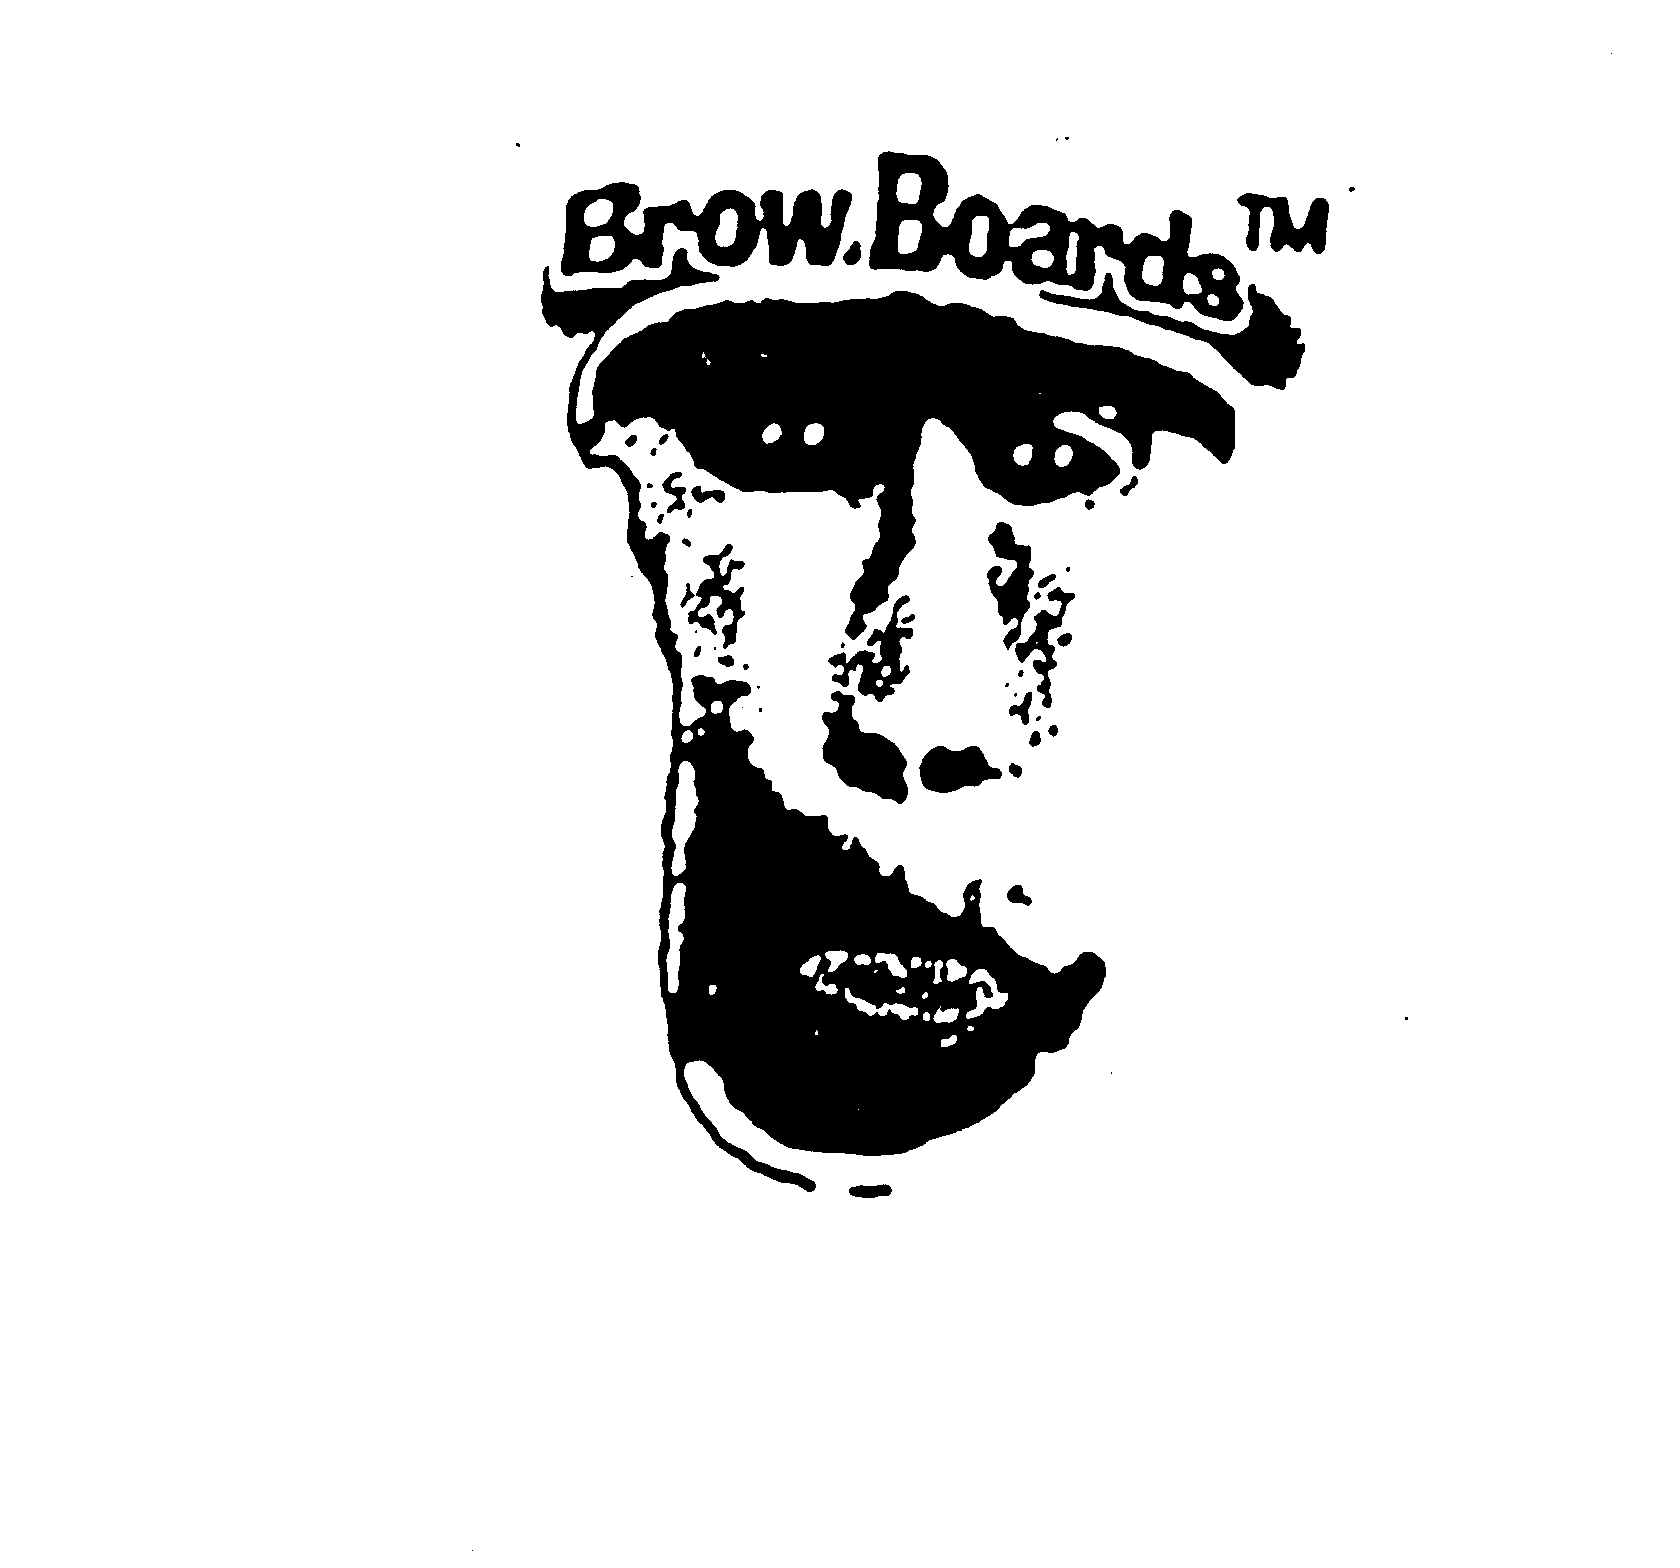  BROW.BOARDS